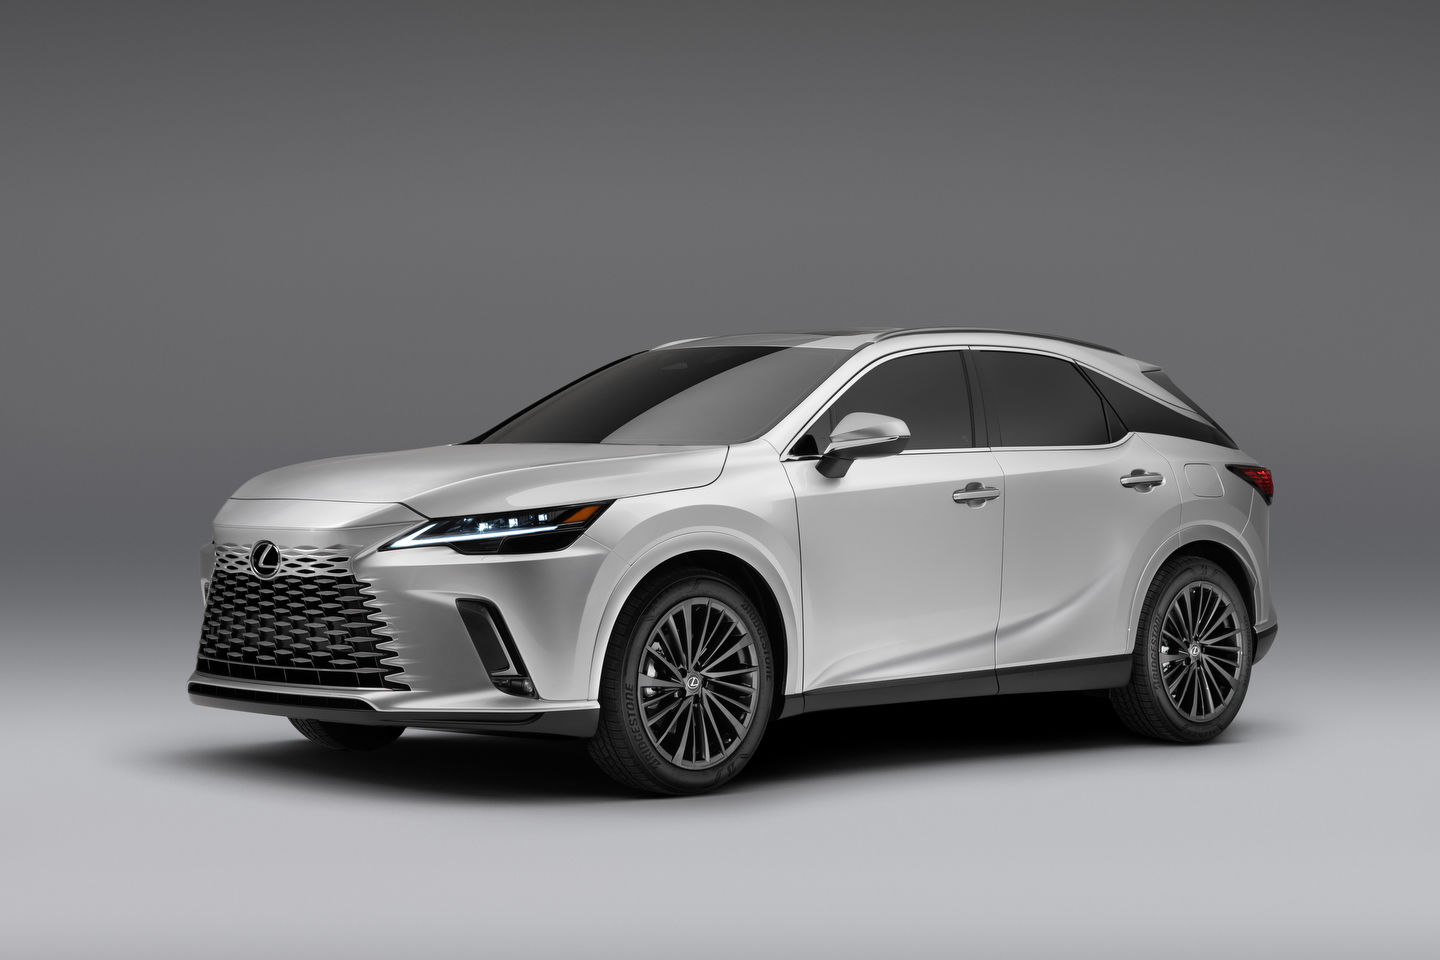 Three things that stand out about the new 2023 Lexus RX